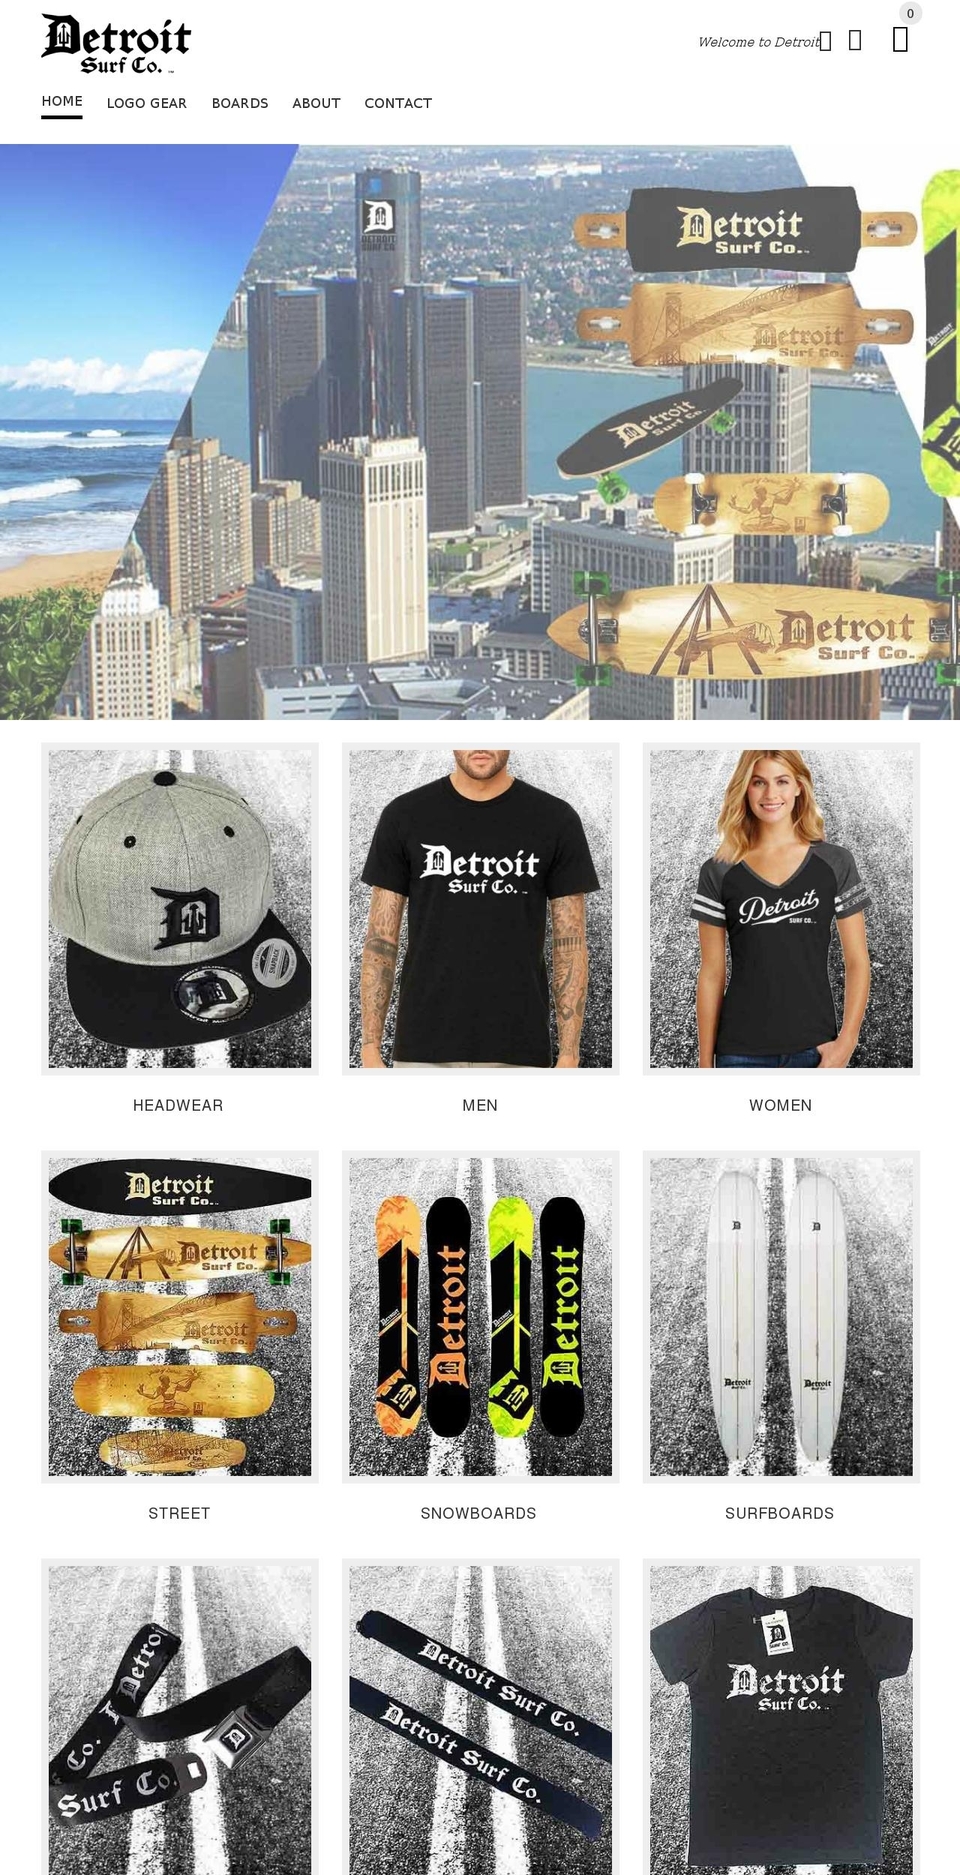 yourstore-v1-4-8 Shopify theme site example detroitsurfshop.com